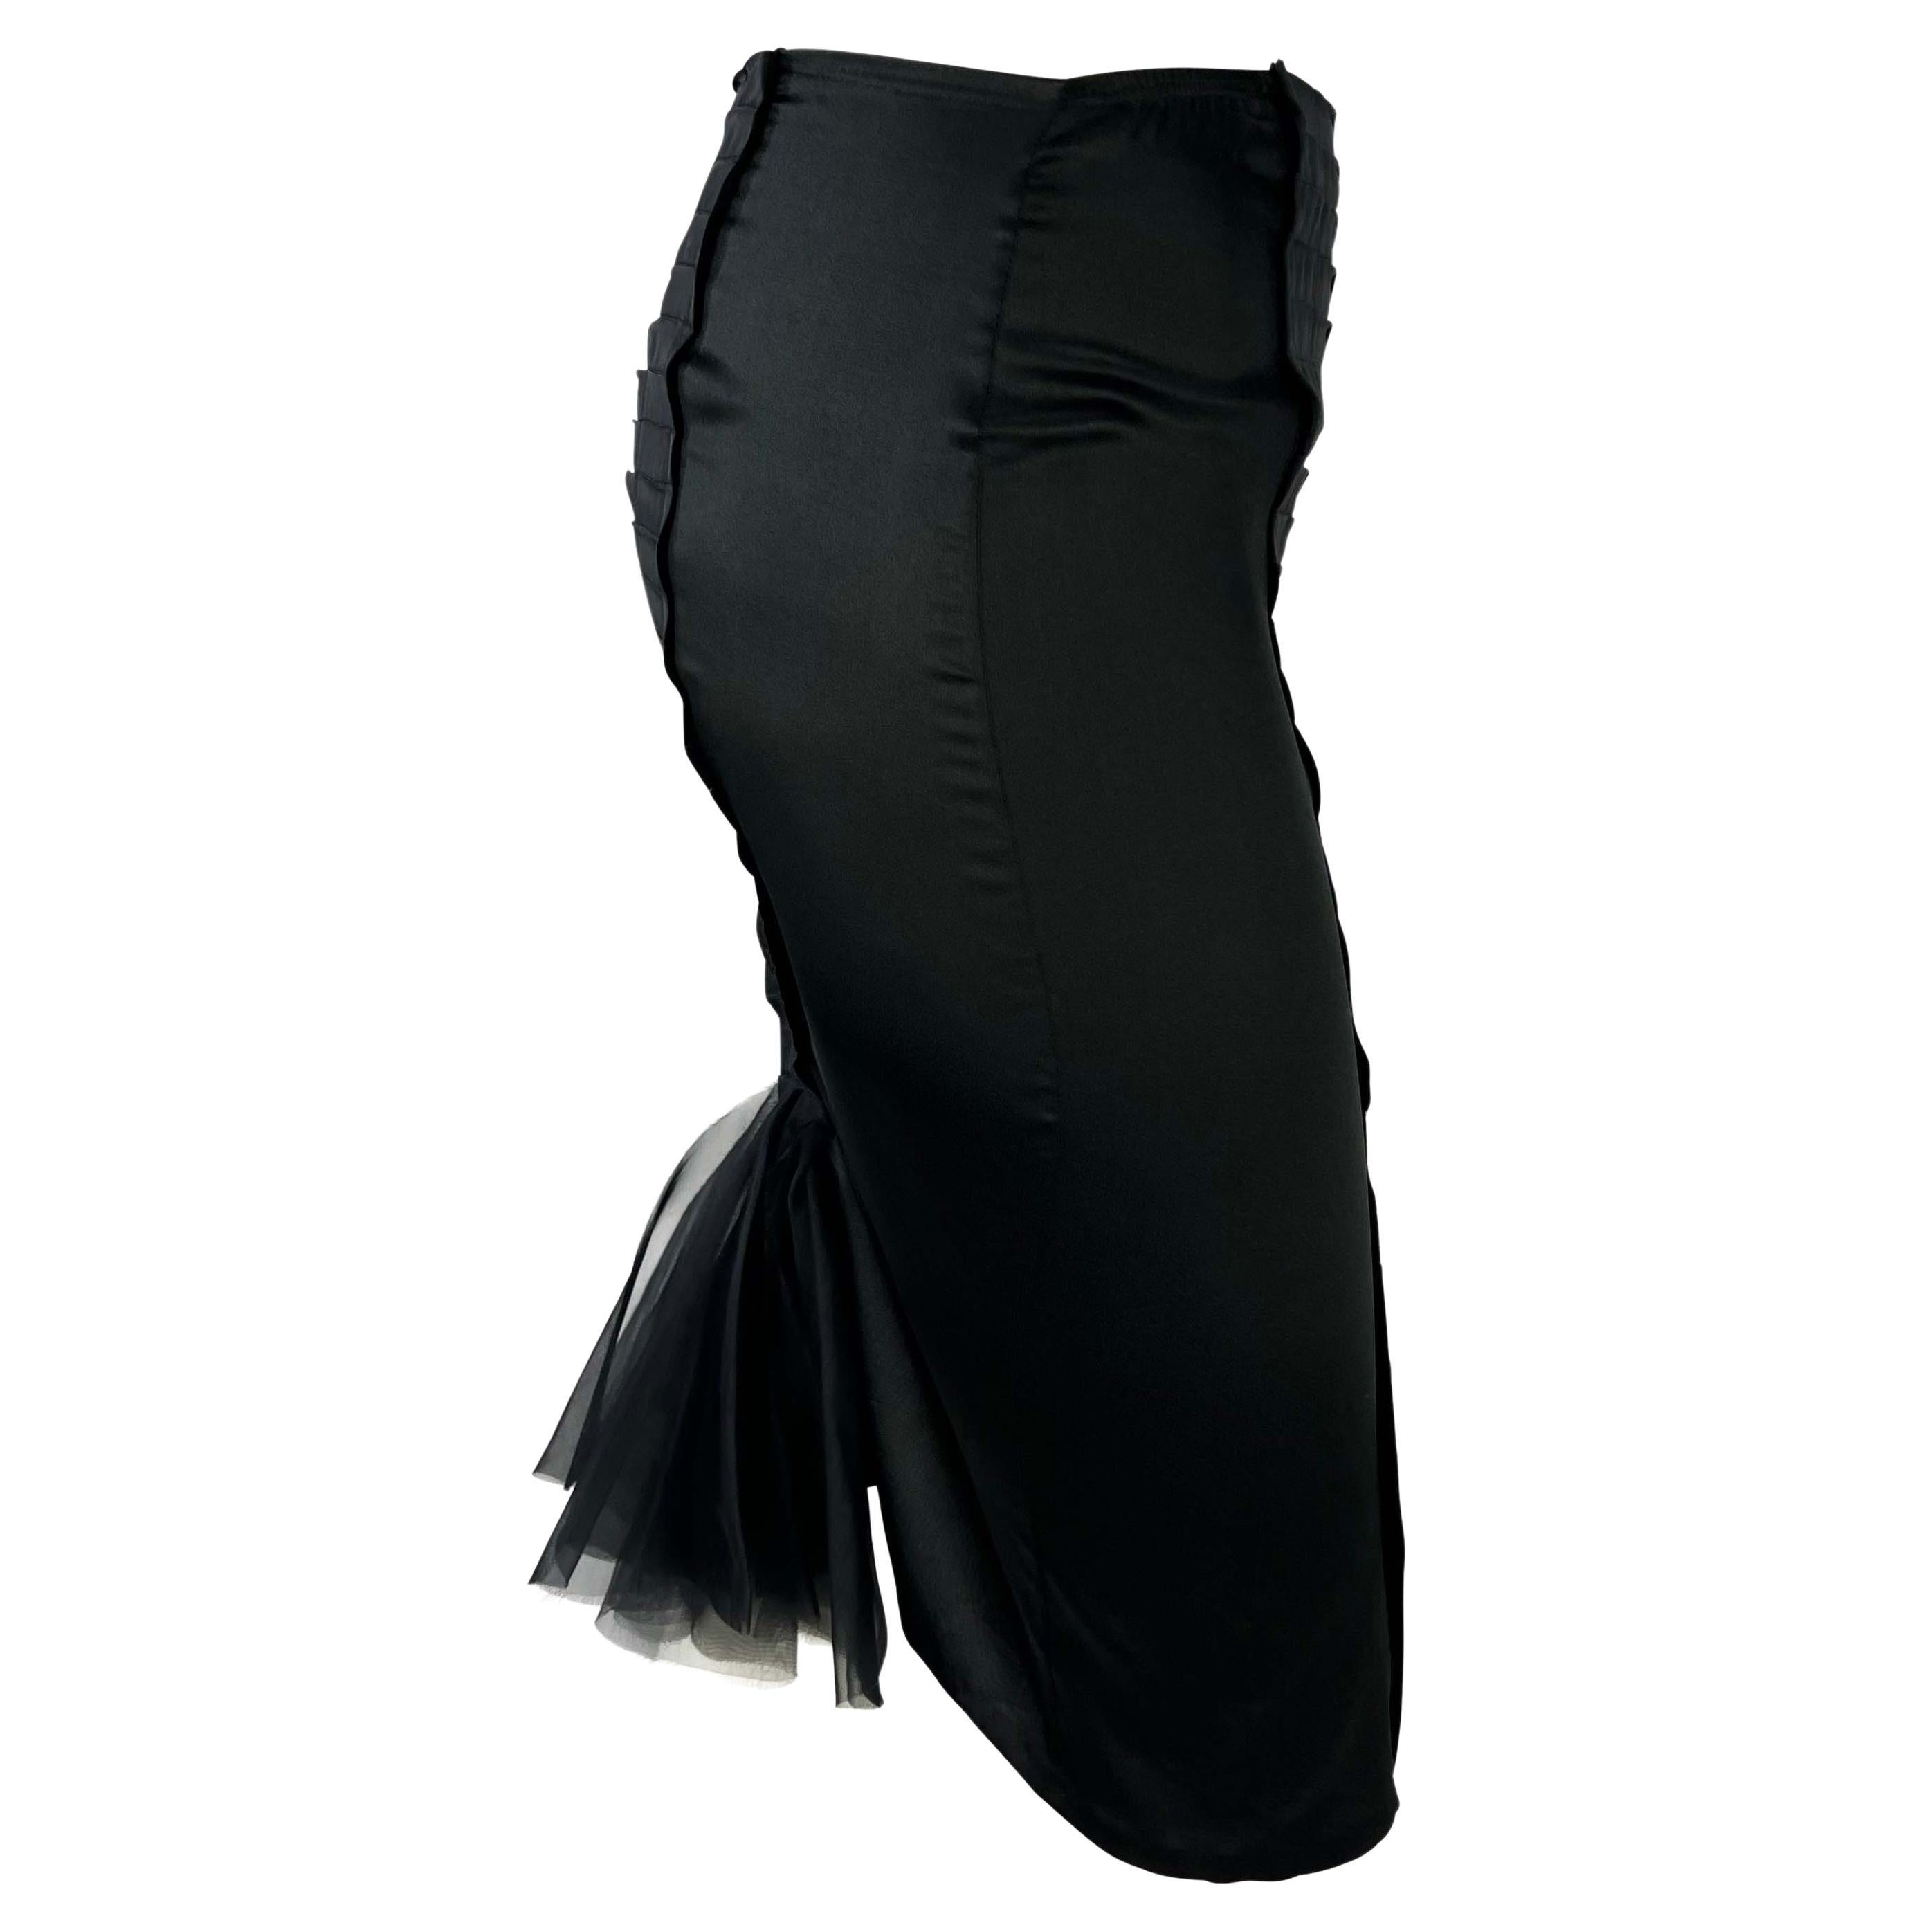 S/S 2004 Gucci by Tom Ford Black Pleated Sheer Tapered Stretch Wiggle Skirt In Good Condition For Sale In West Hollywood, CA